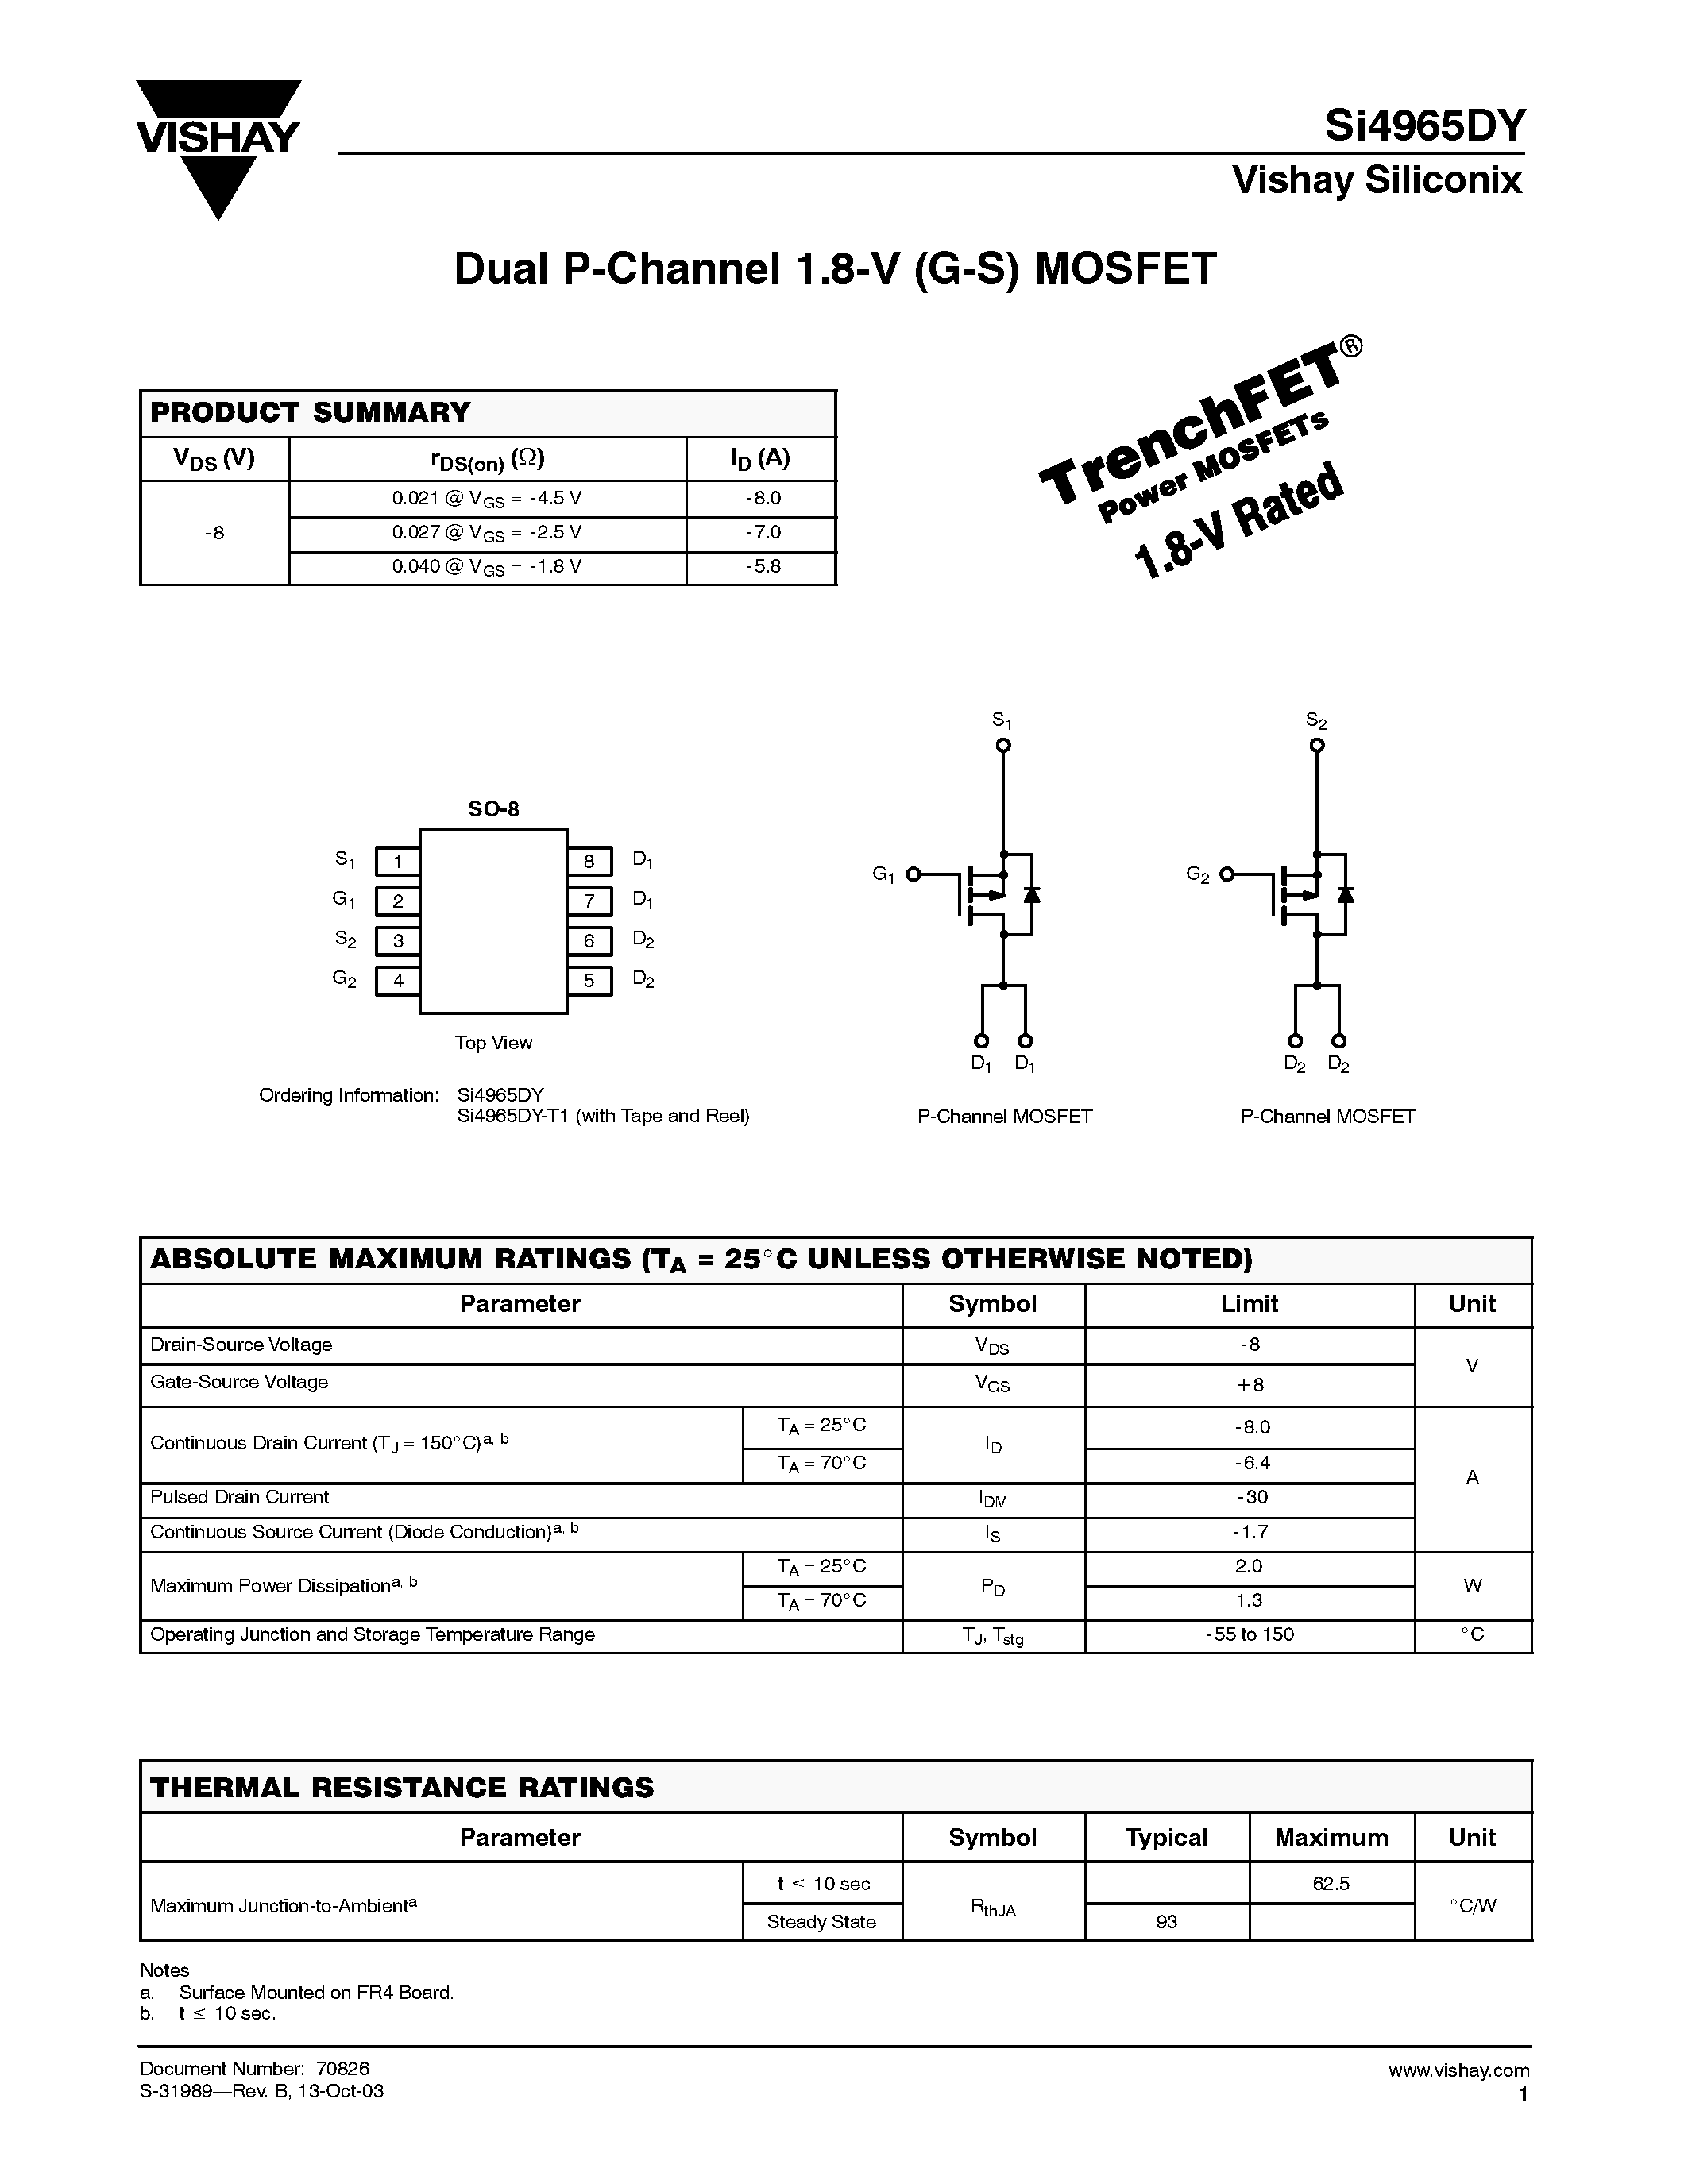 Даташит SI4965DY - Dual P-Channel 1.8-V (G-S) MOSFET страница 1